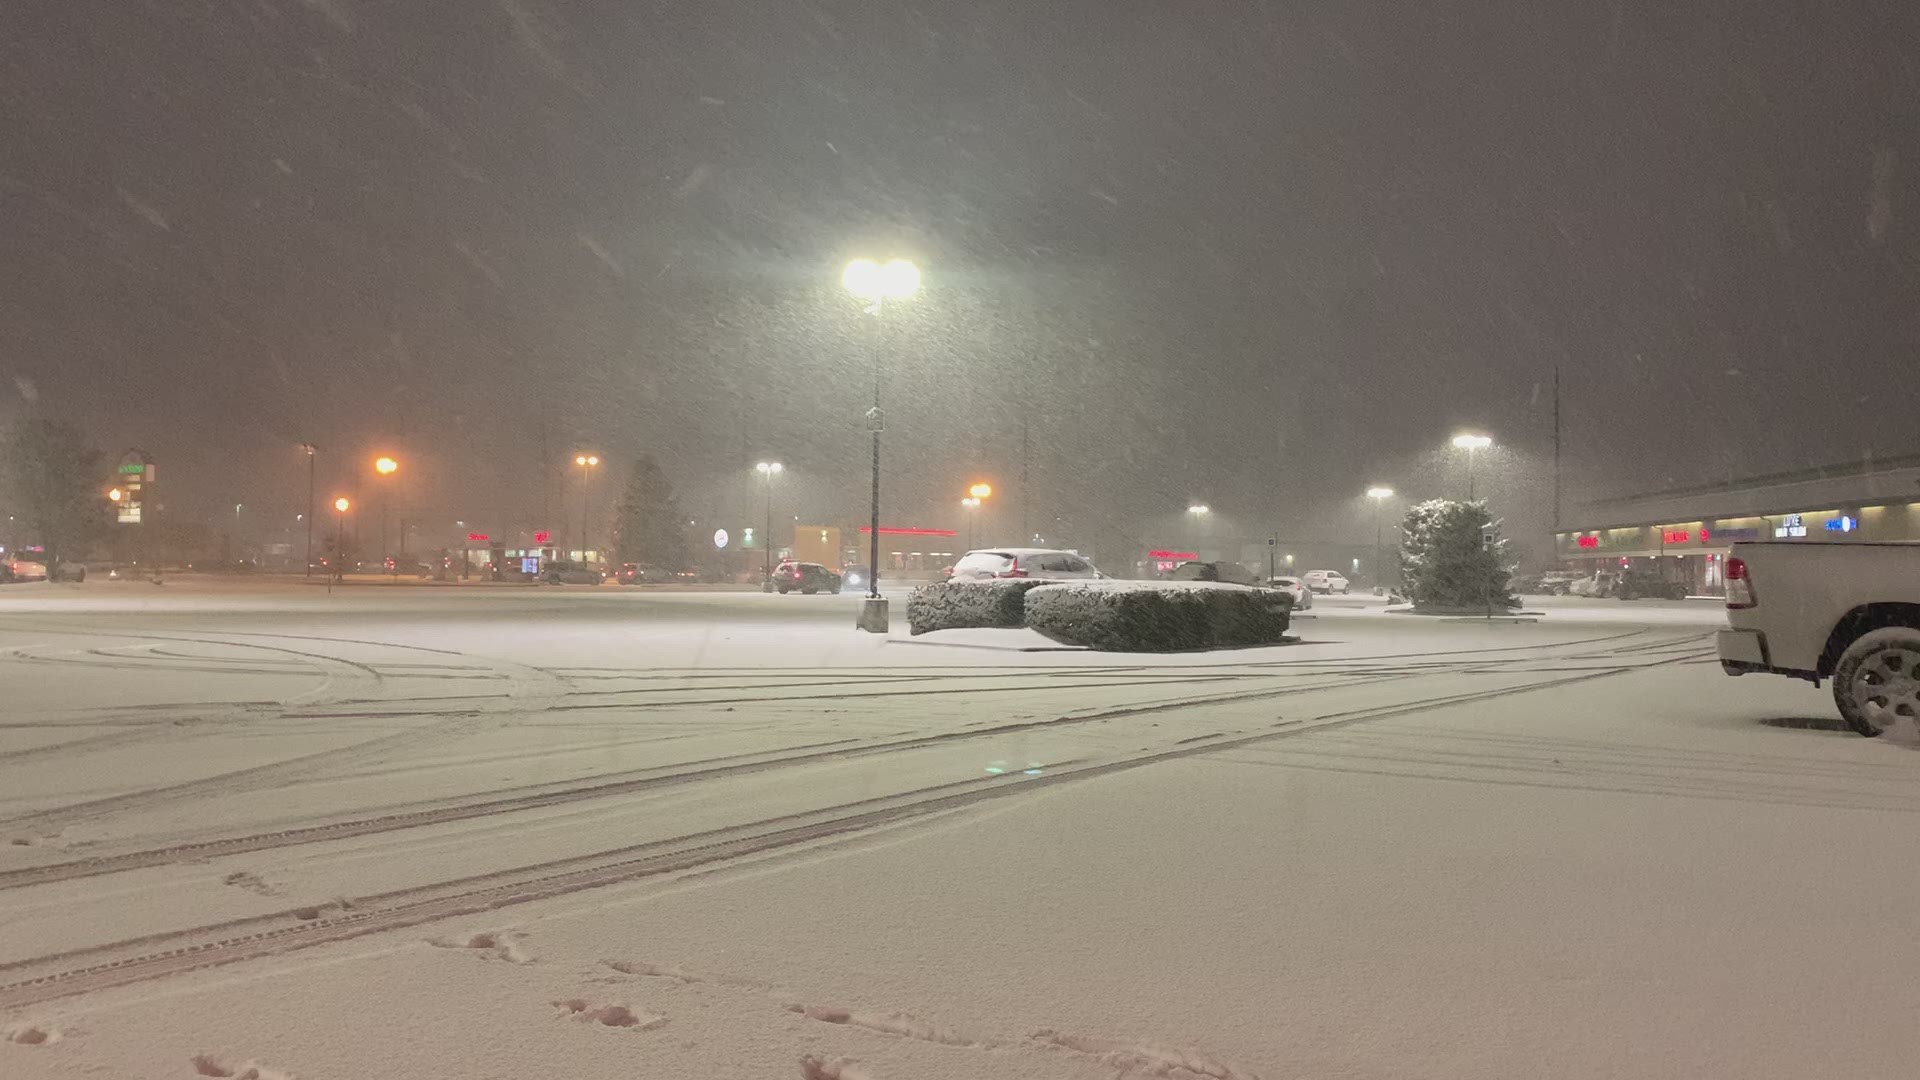 13News' Karen Campbell sent in a video showing what the snowfall looks like in Avon.